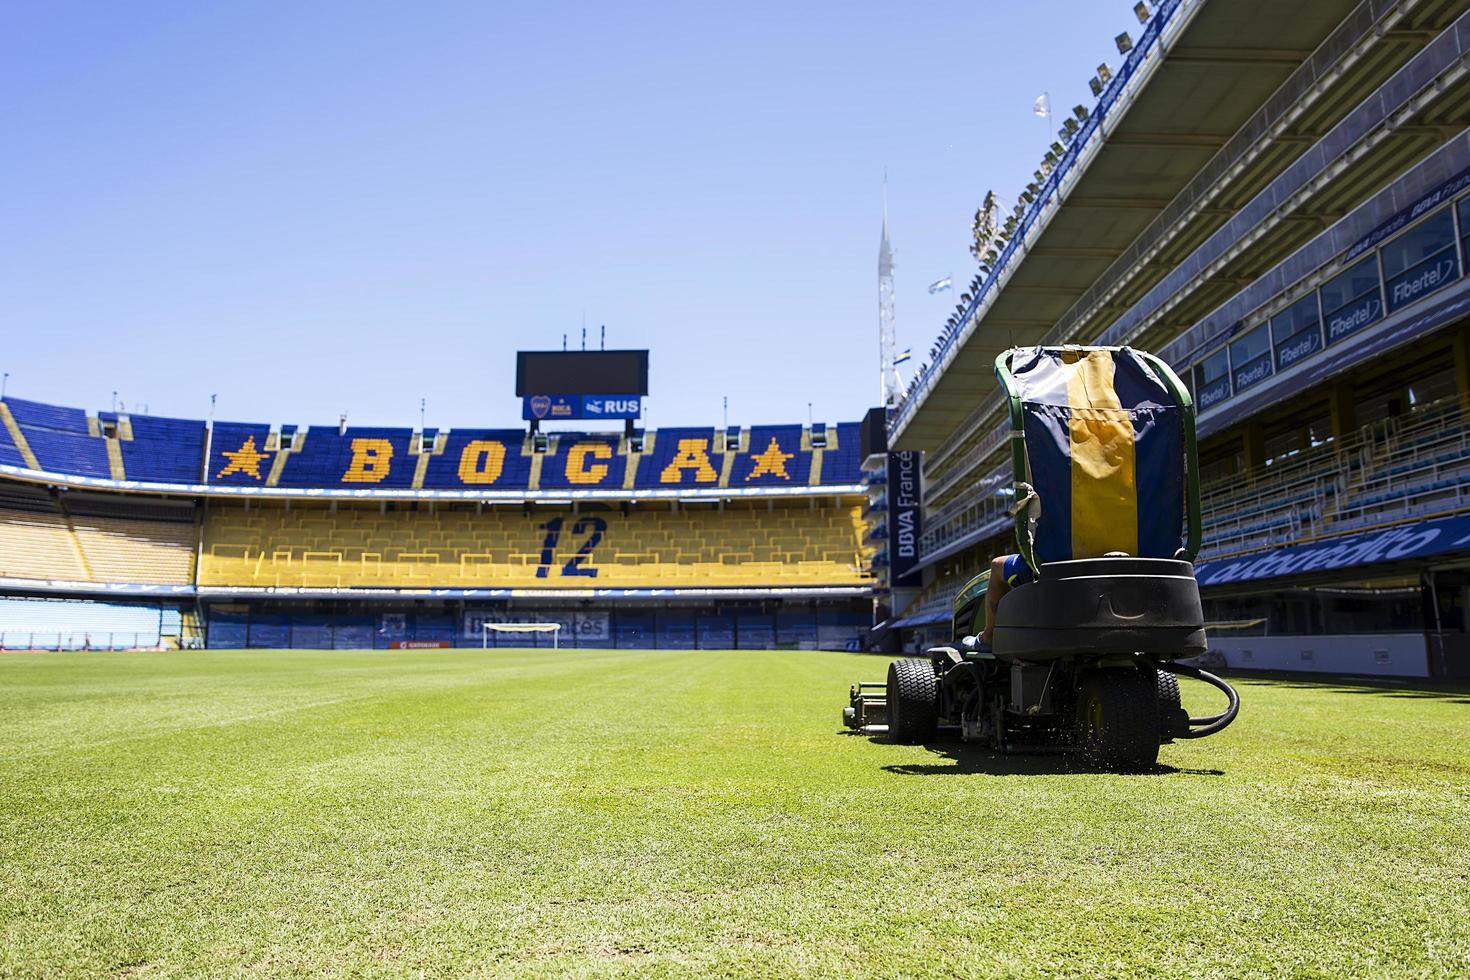 BUENOS AIRES, ARGENTINA, JANUARY 20, 2018 - Lawnmower from La bombonera stadium in Buenos aires, Argentina. It is Boca Juniors owned stadium and was built at  1938. photo